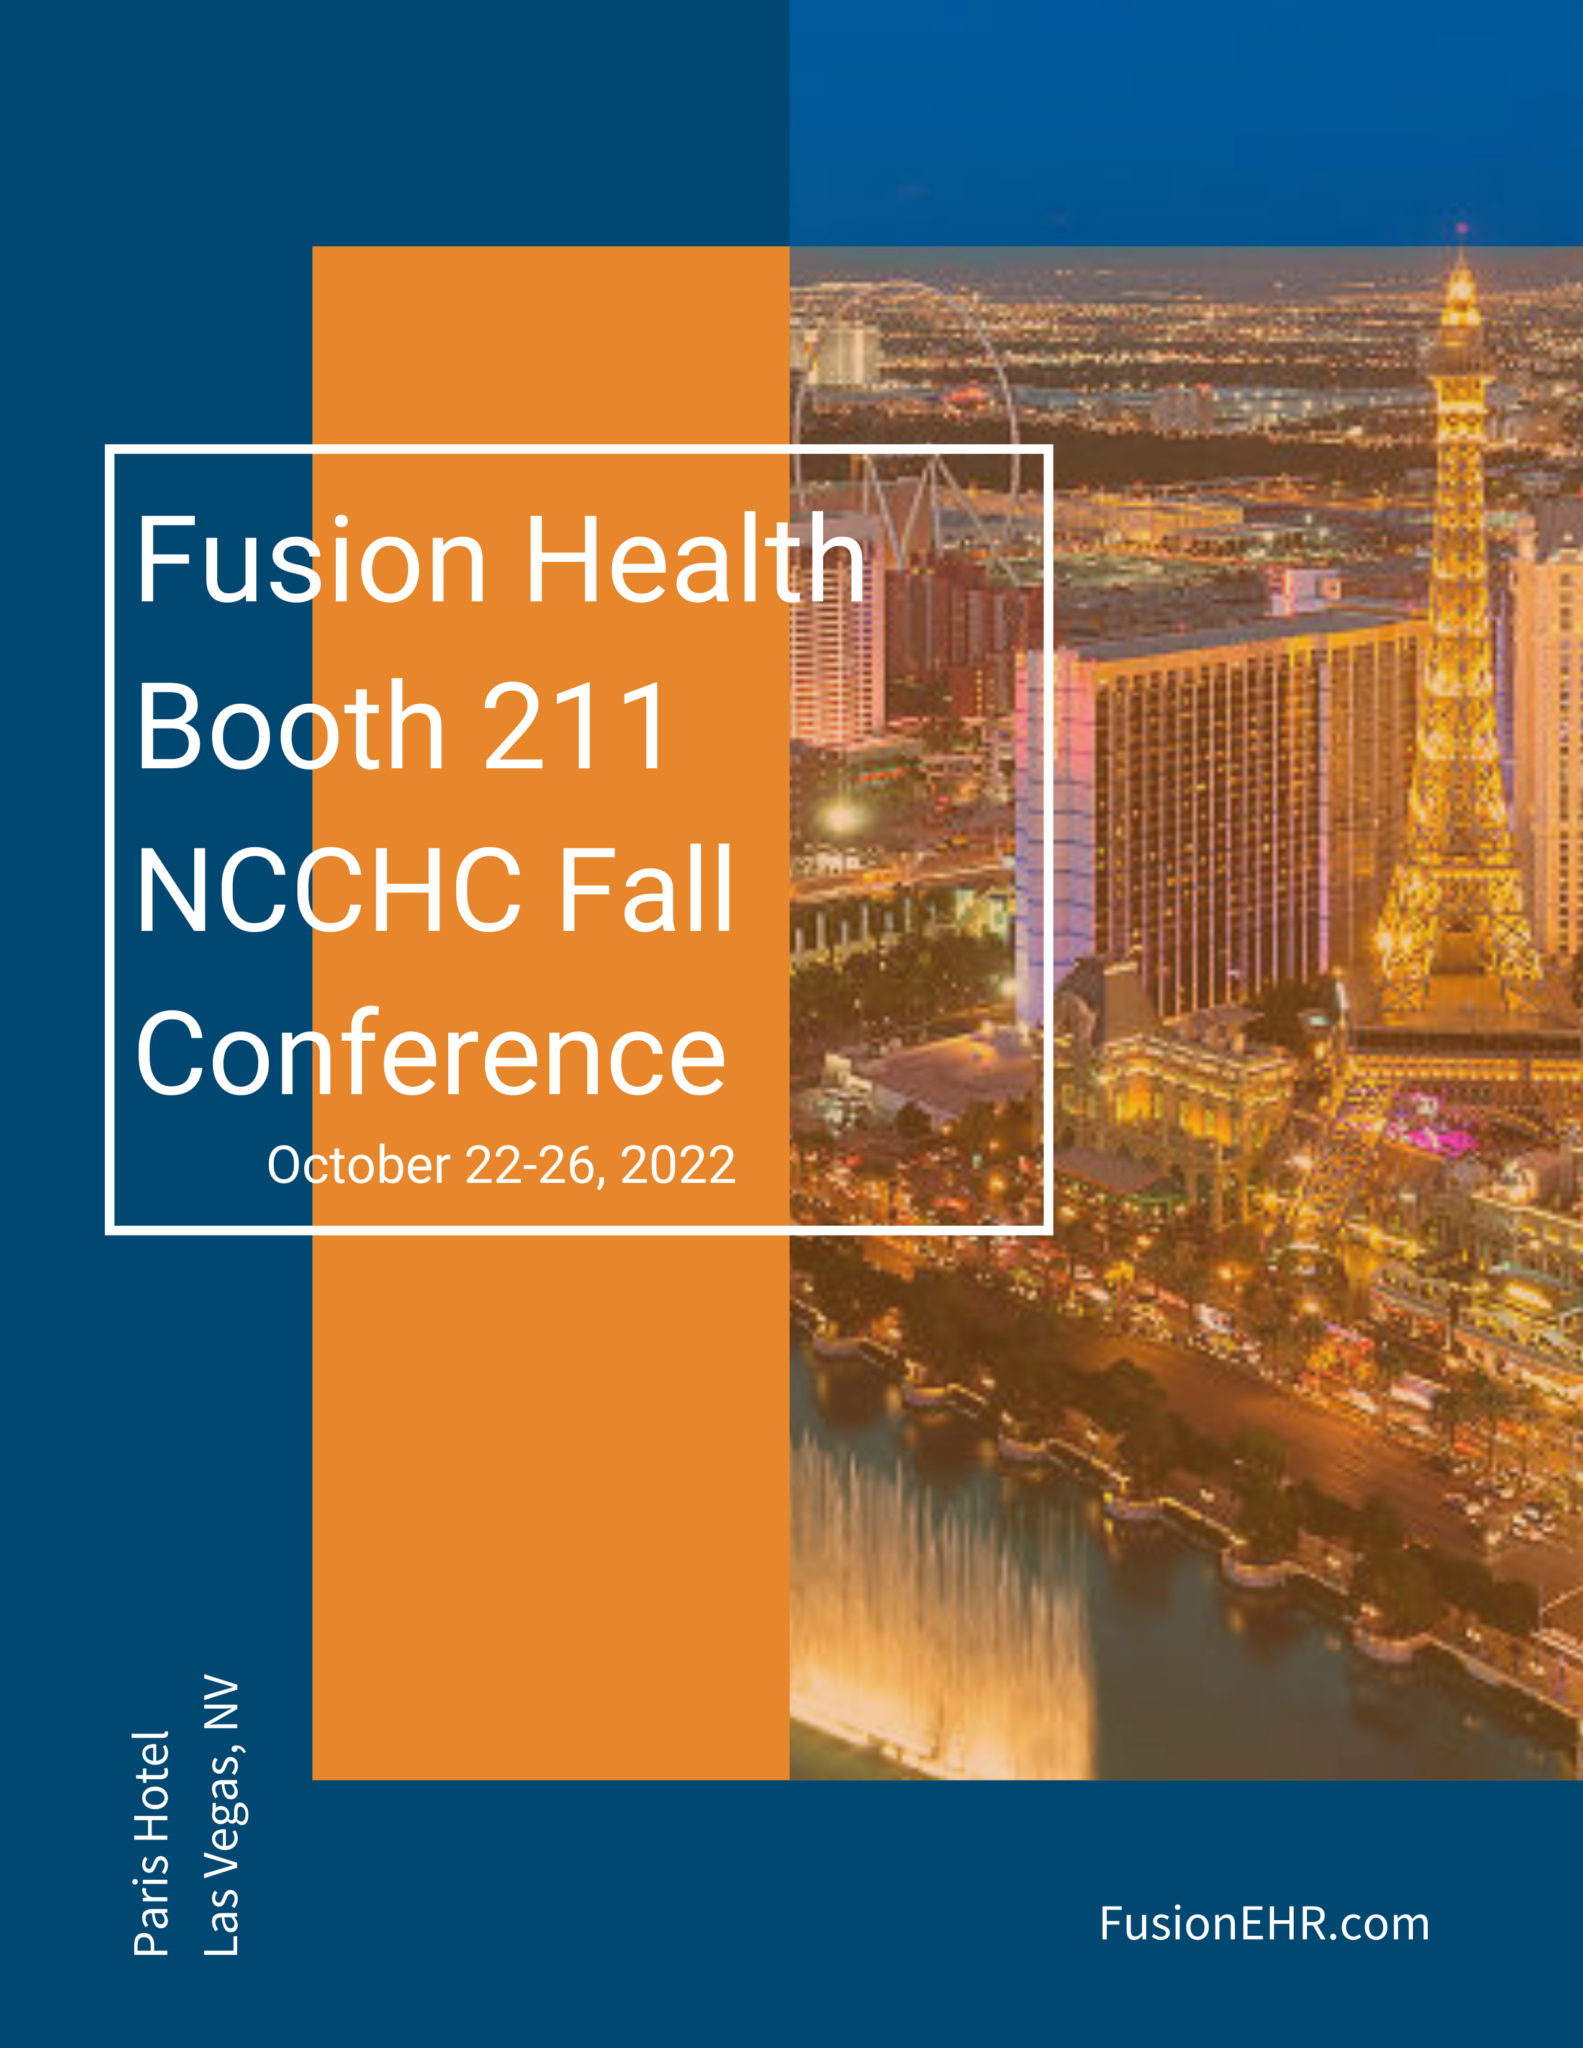 NCCHC Fall Conference 2022 Fusion